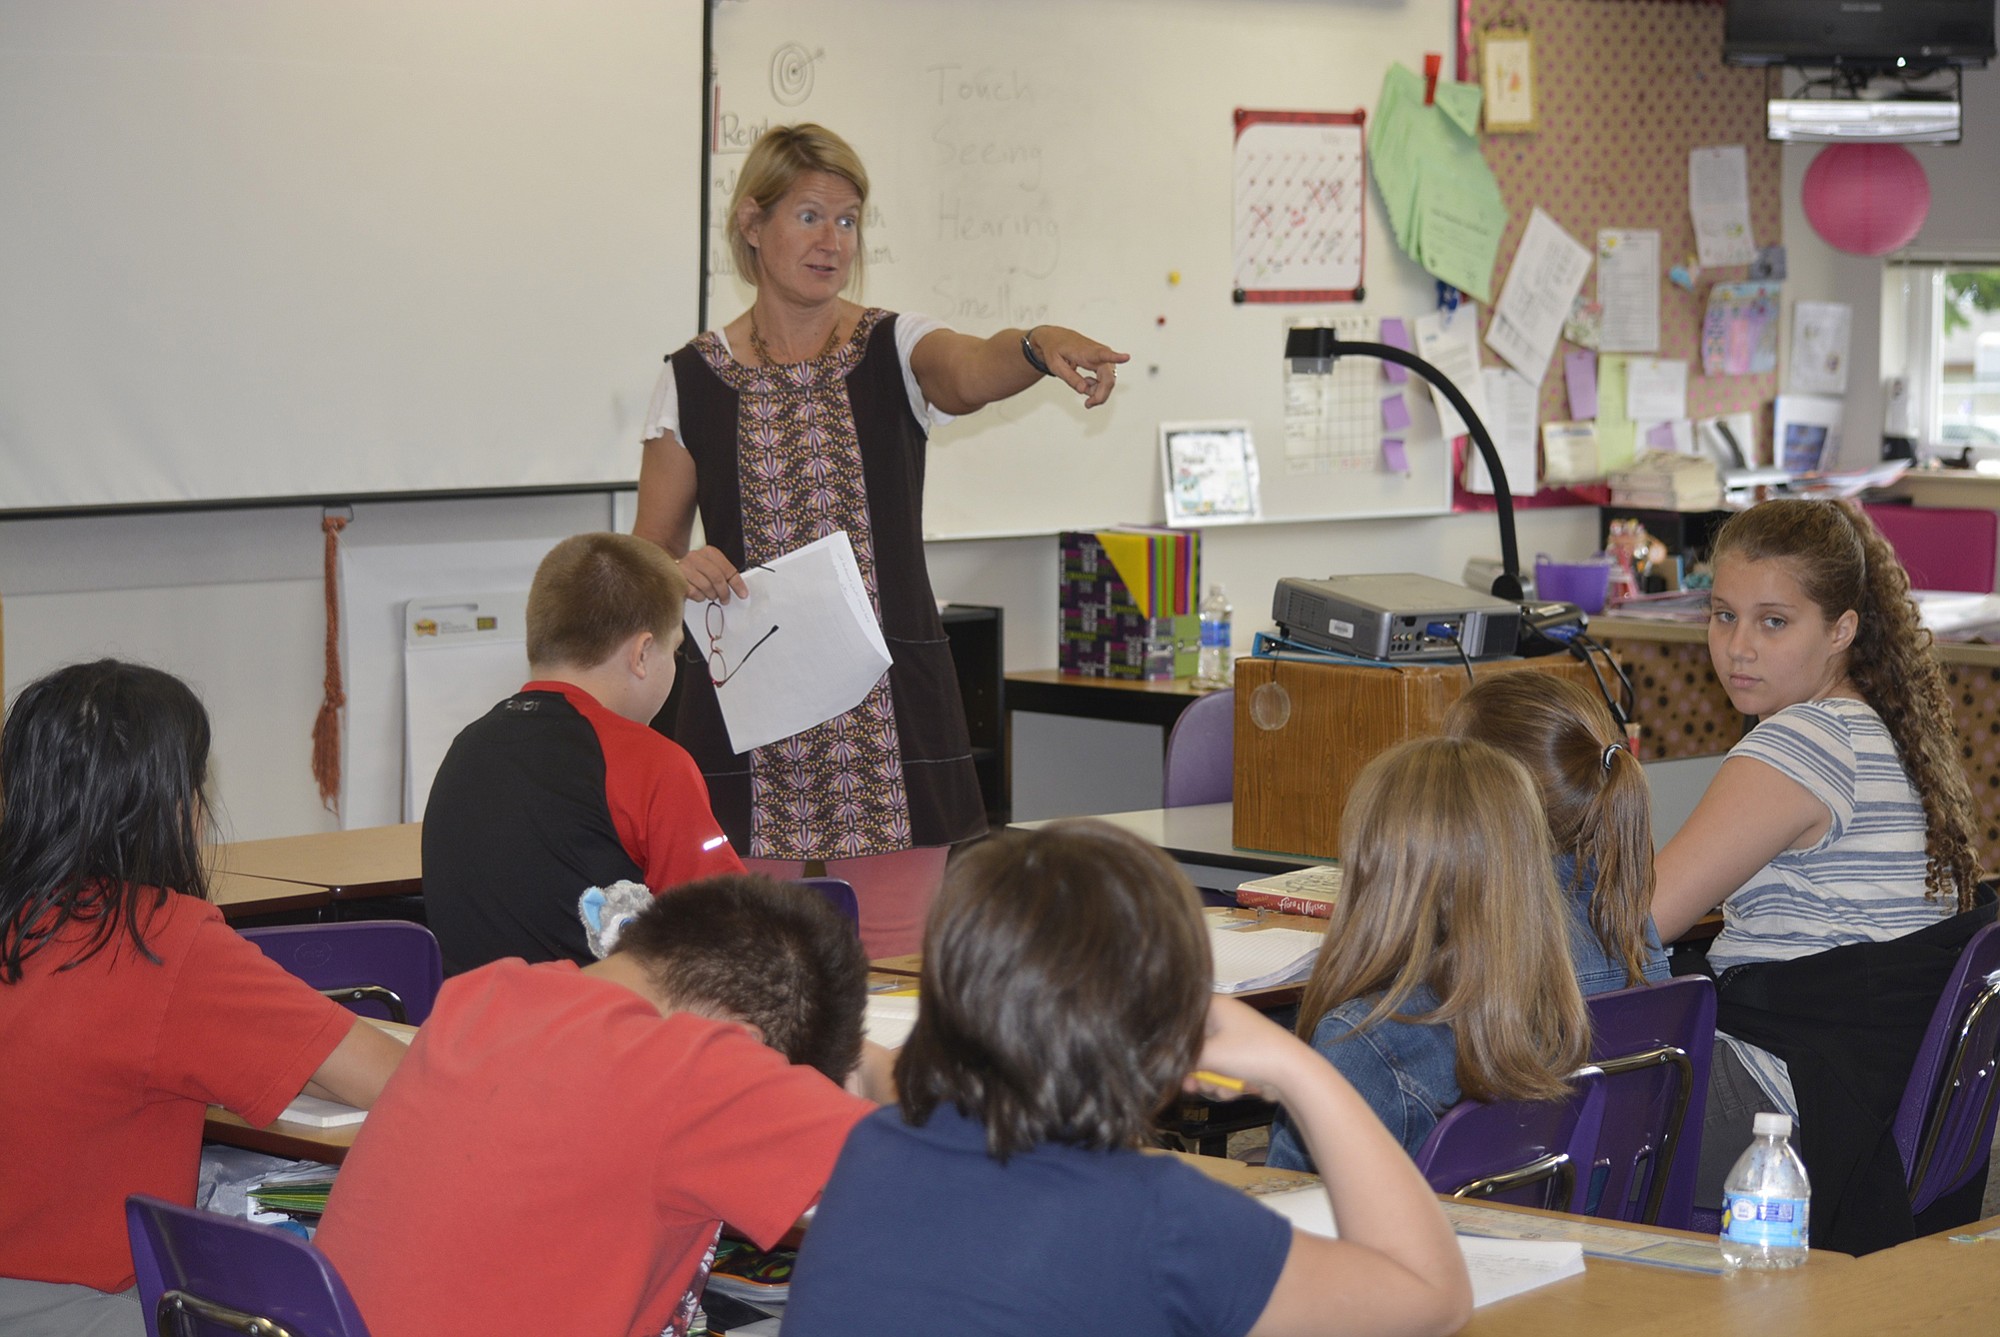 Washougal: Award-winning children's book author Elizabeth Rusch visited Hathaway Elementary School, holding two assemblies and three writing workshops with students.